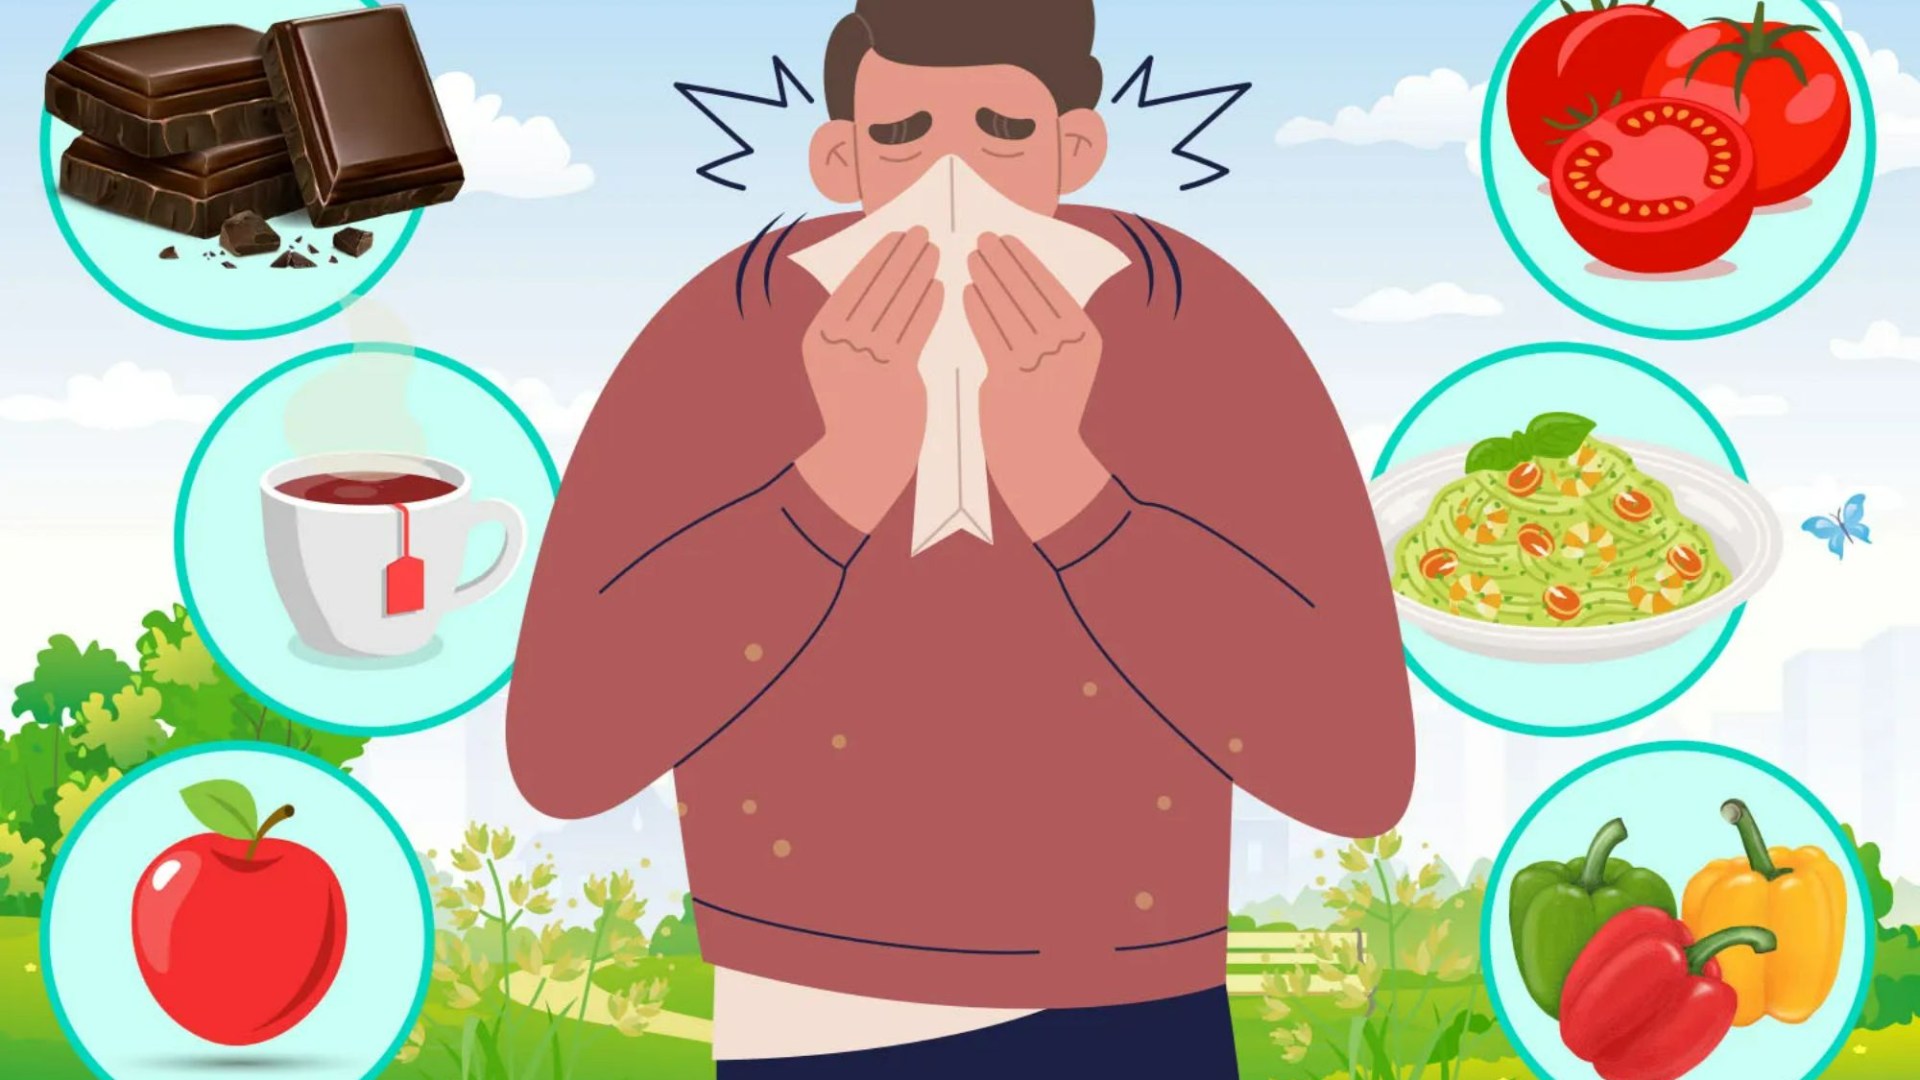 The 7 foods that help fight against hay fever fast due to ‘secret wonder’ ingredient [Video]